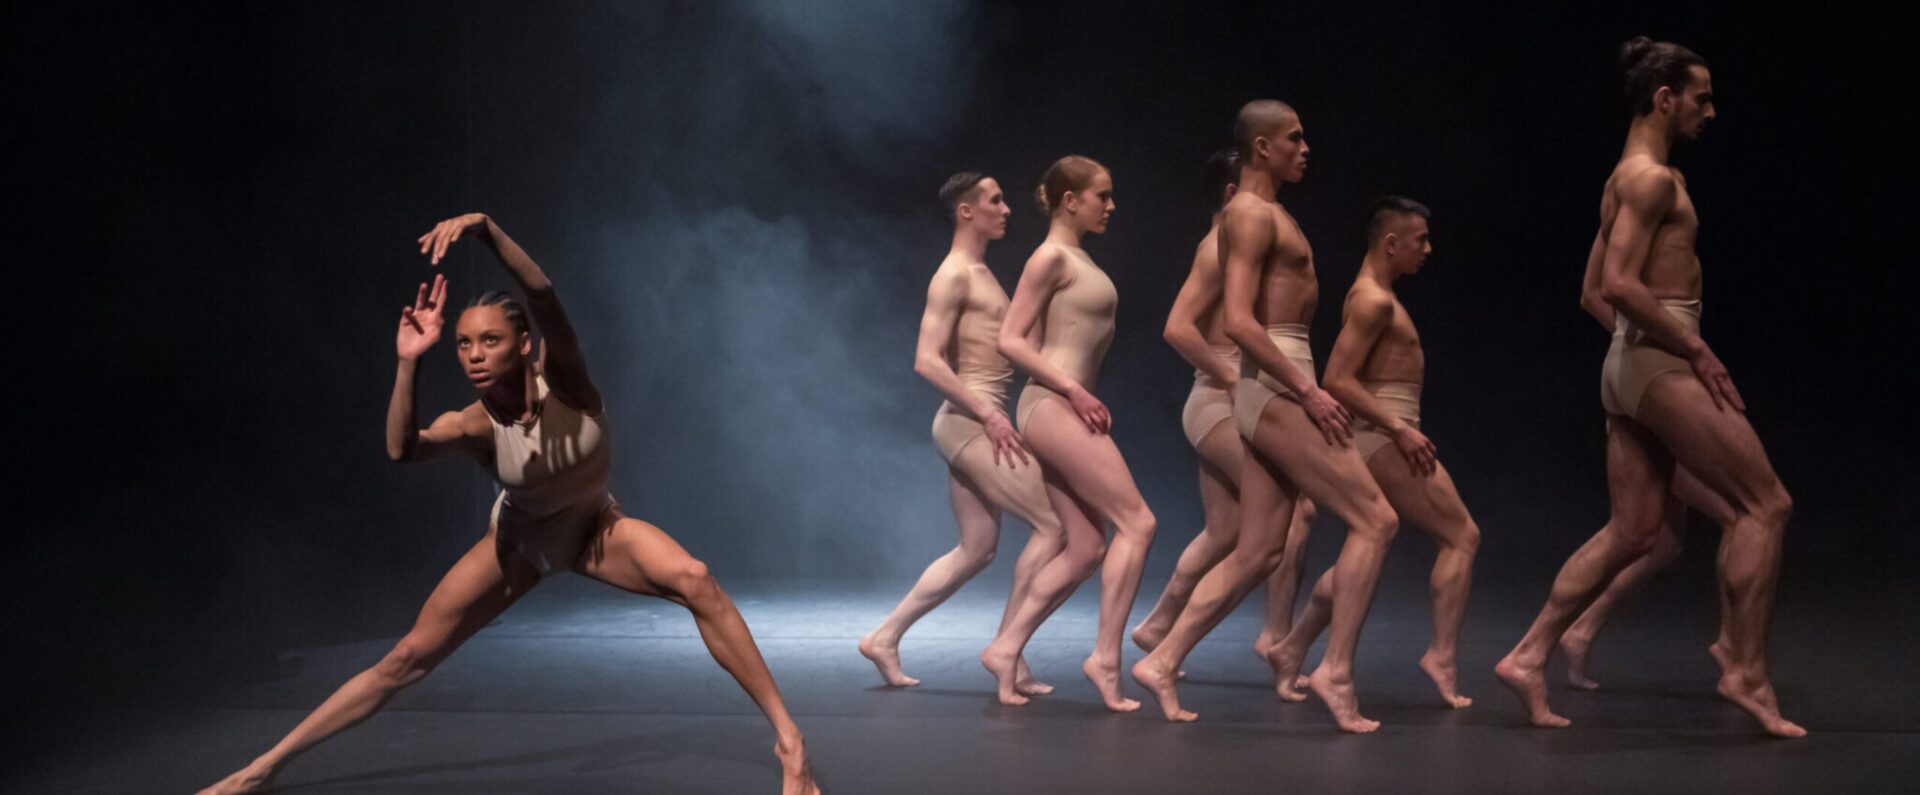 A group of six dancers in minimal costumes perform a contemporary dance on a dimly lit stage, with one dancer extending her arms and legs in the foreground and the others walking in line behind her.